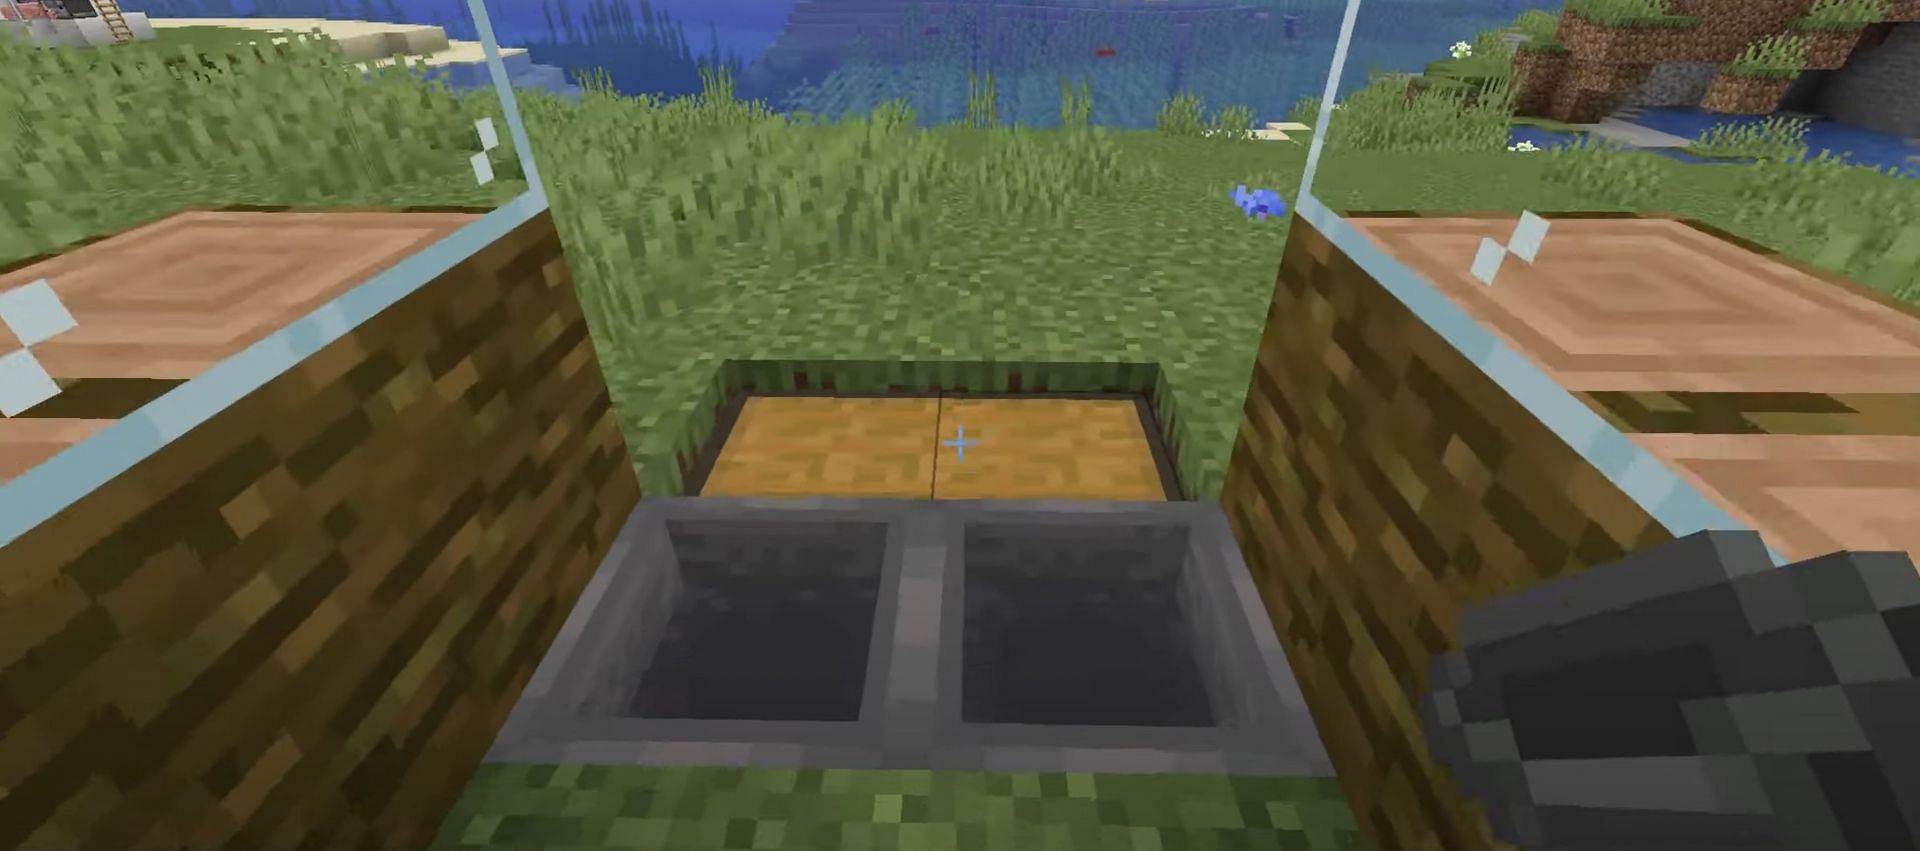 Players should place both the chests and hoppers (Image via NaMiature/YouTube)